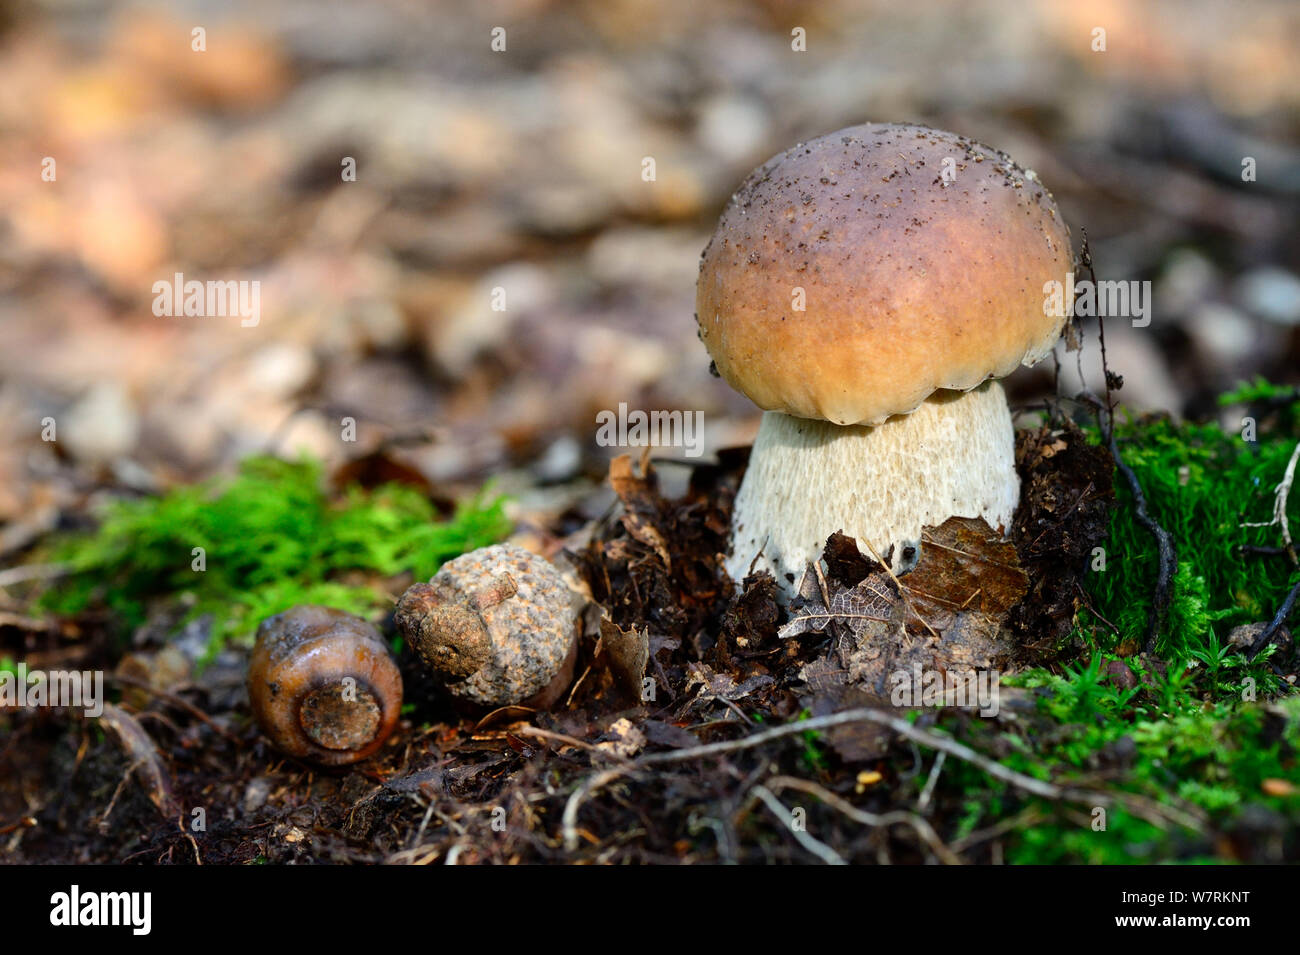 Cep (Boletus edulis) growing on forest floor, Alsace, France, October. Stock Photo